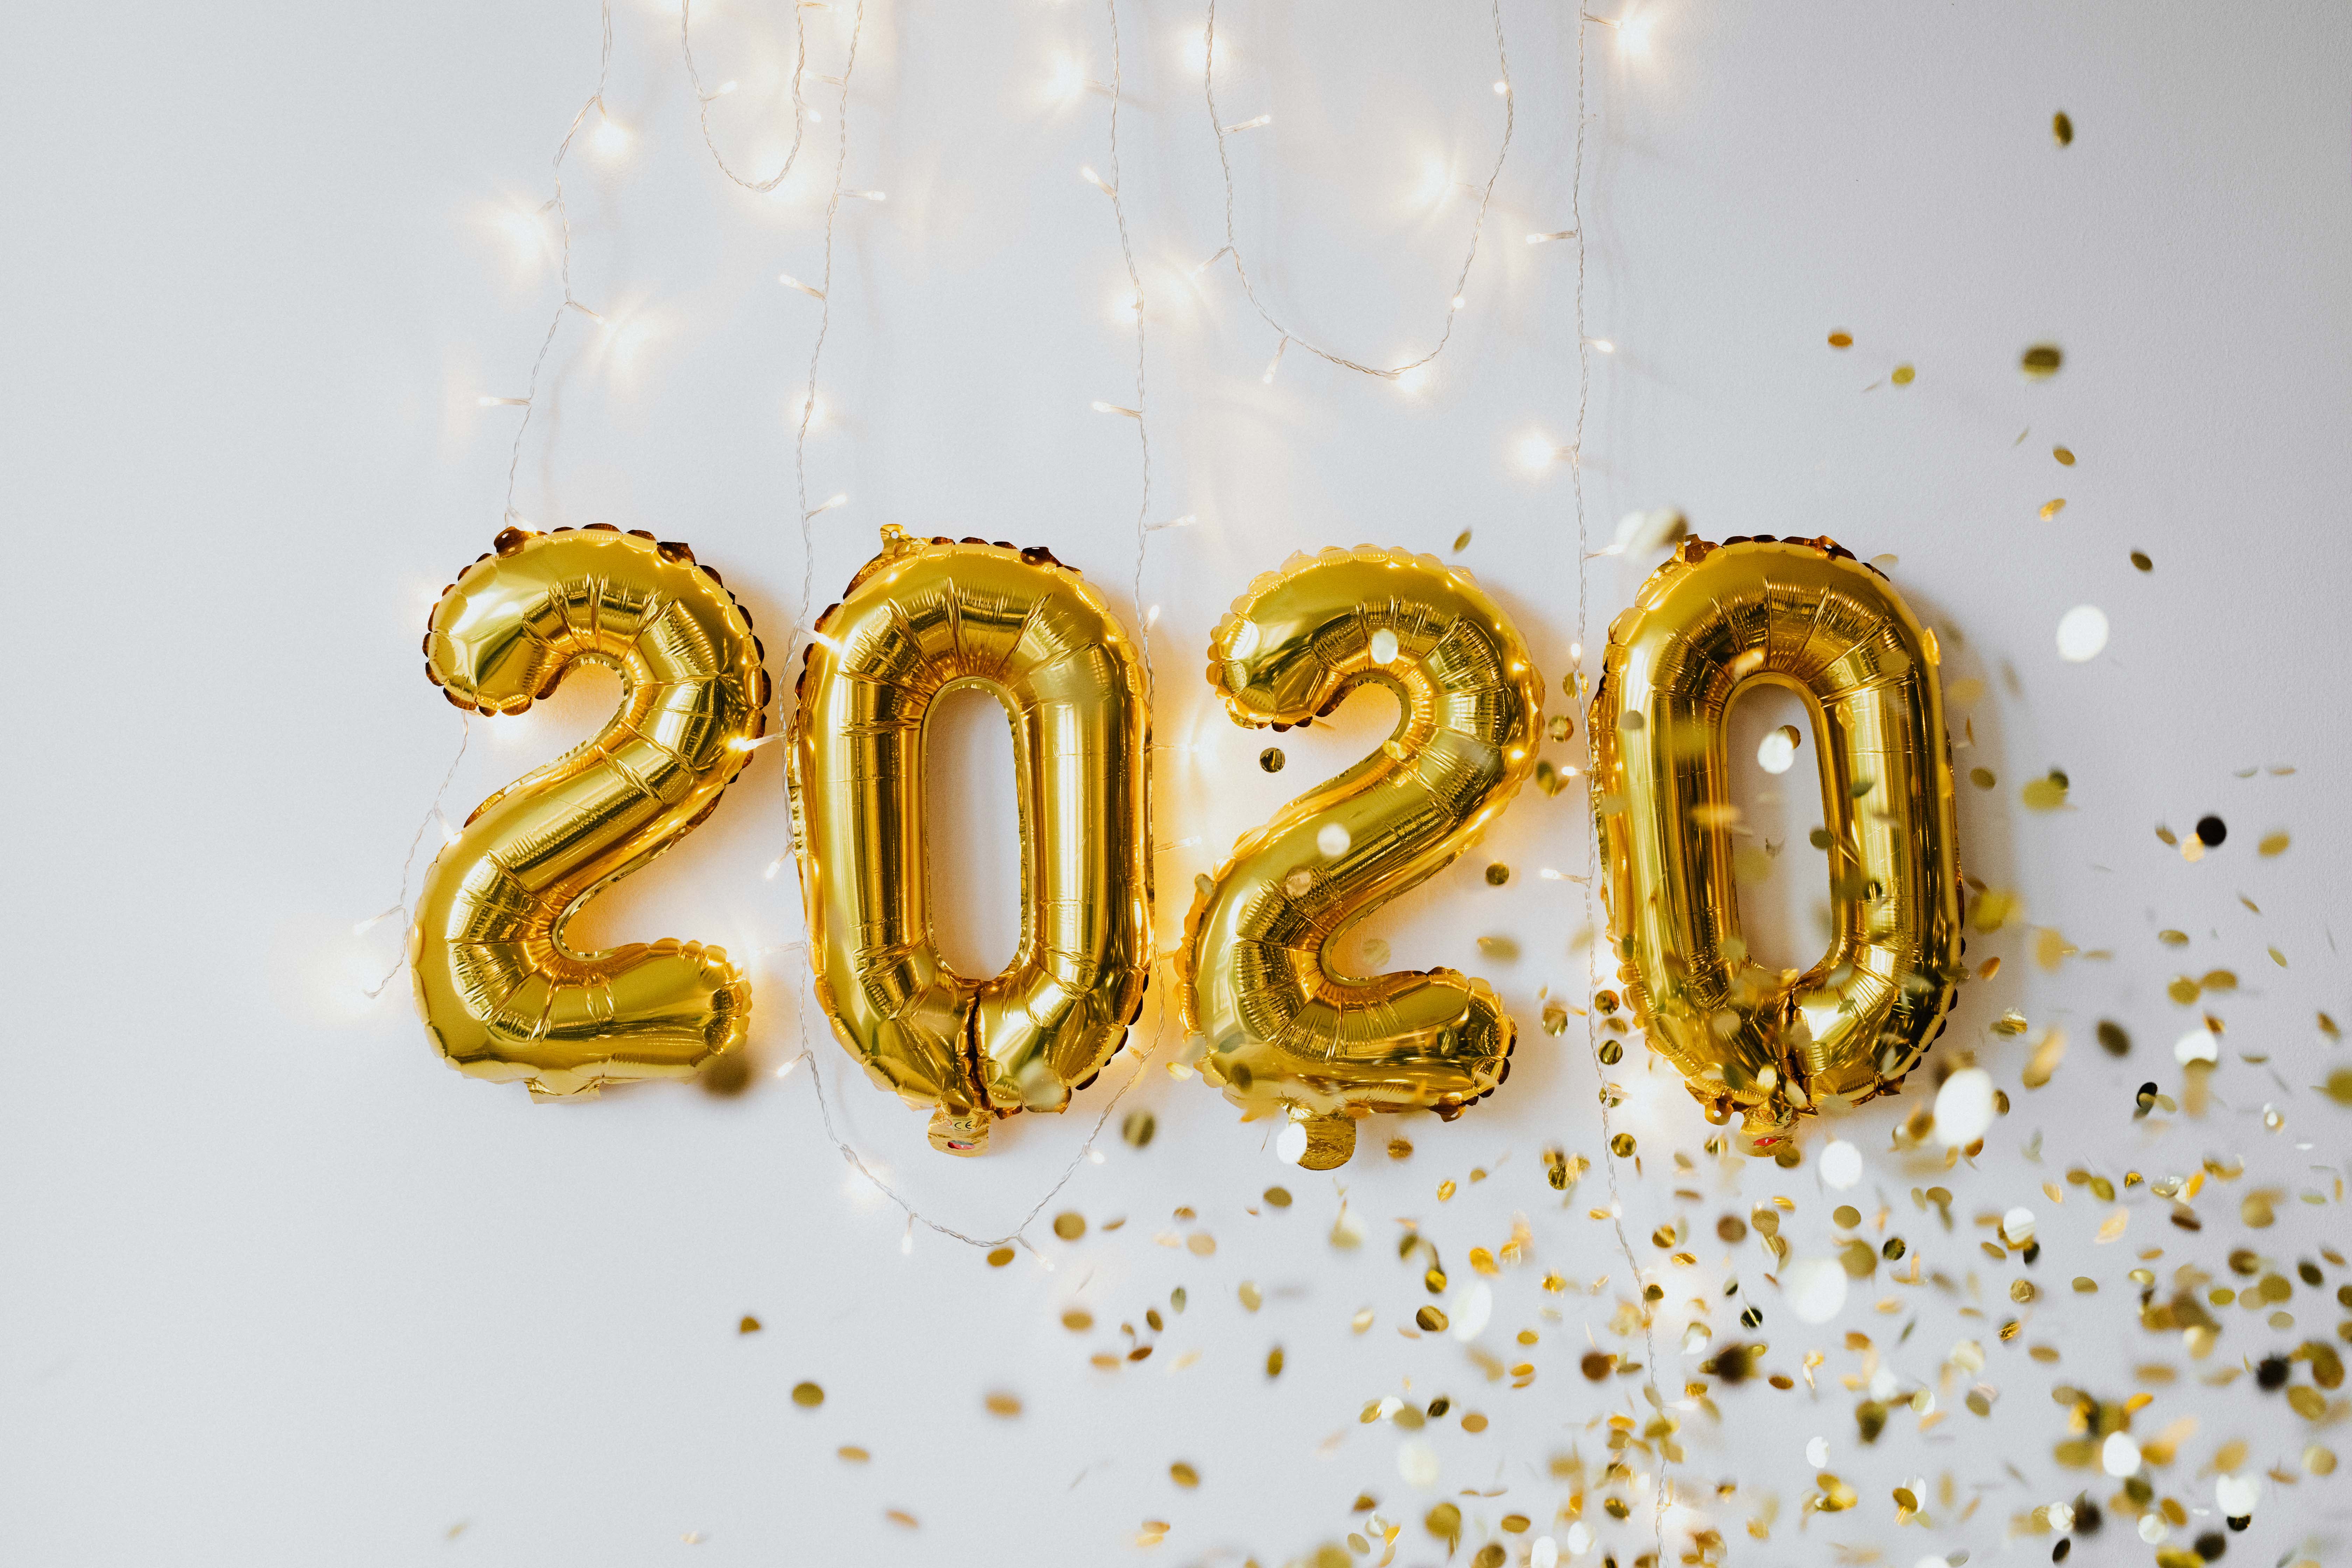 New Year's Eve - Golden balloons in the shape of the year 2020